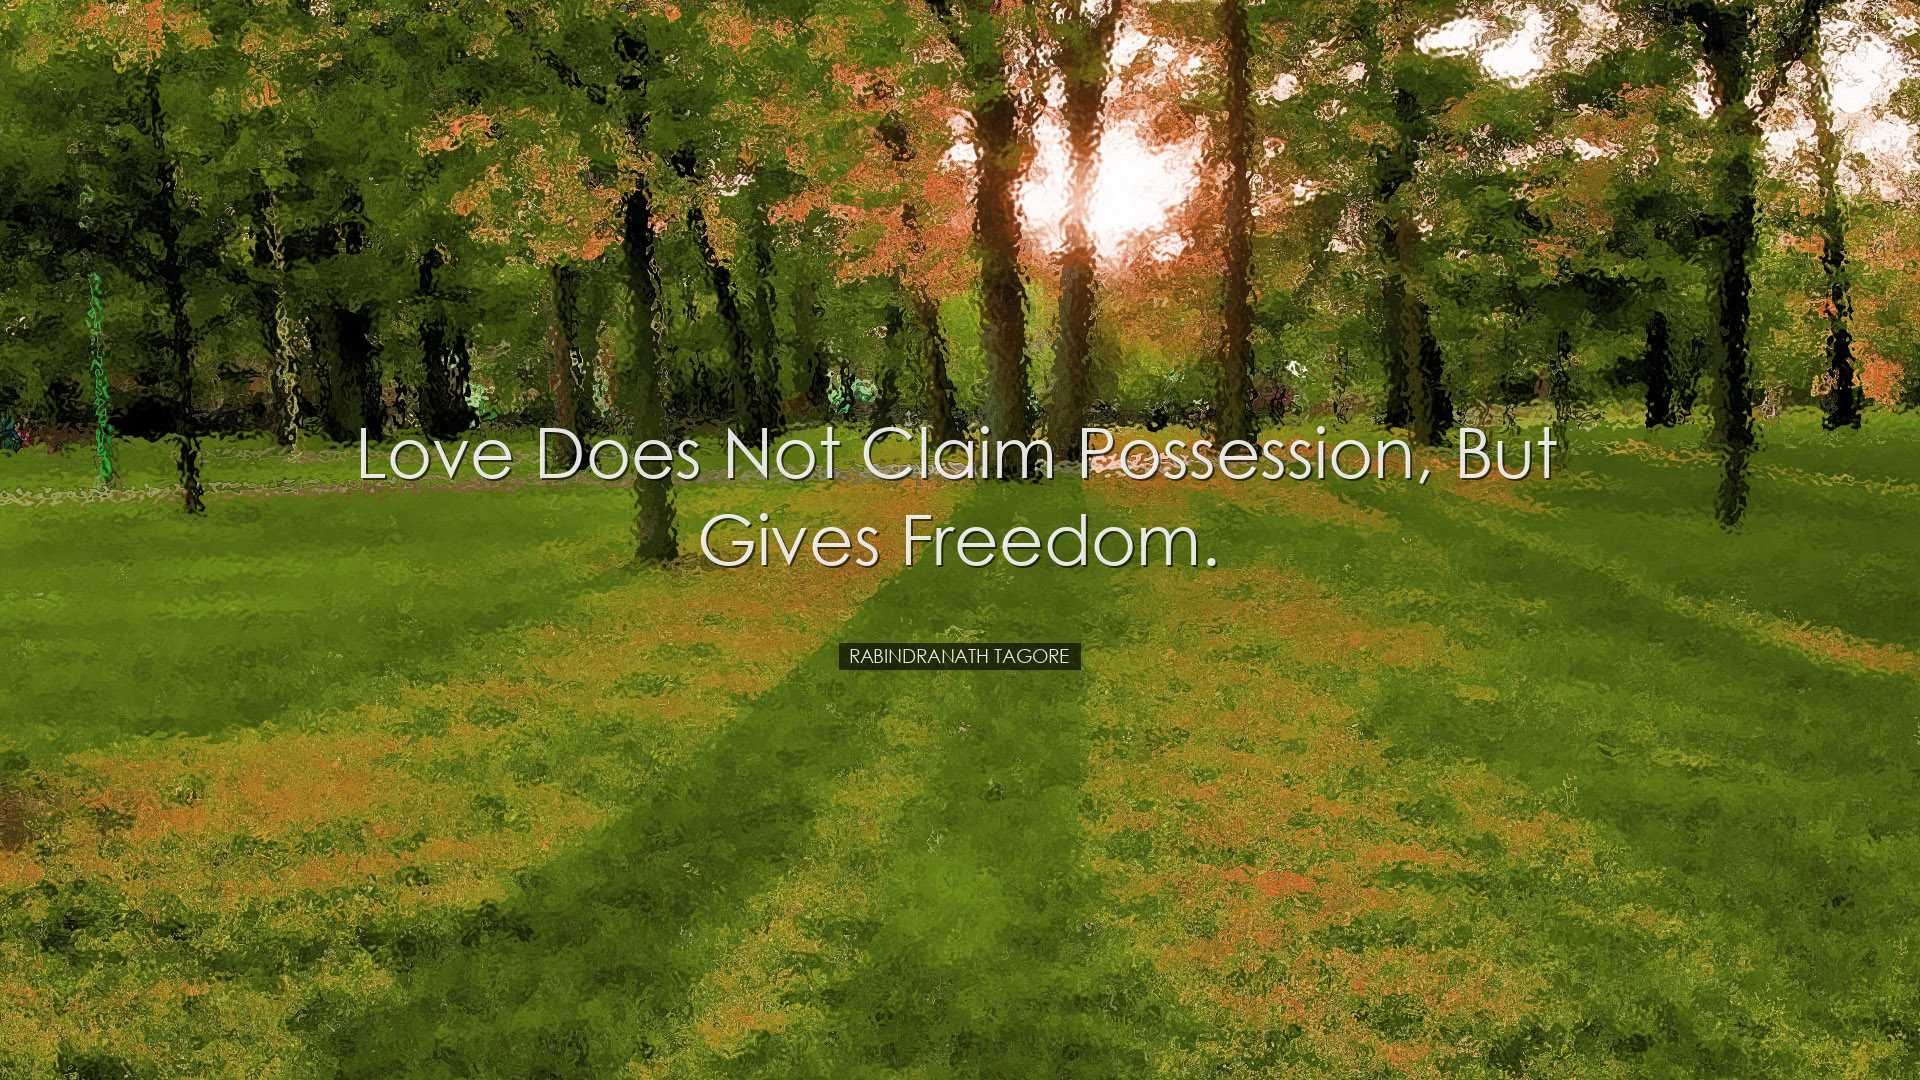 Love does not claim possession, but gives freedom. - Rabindranath